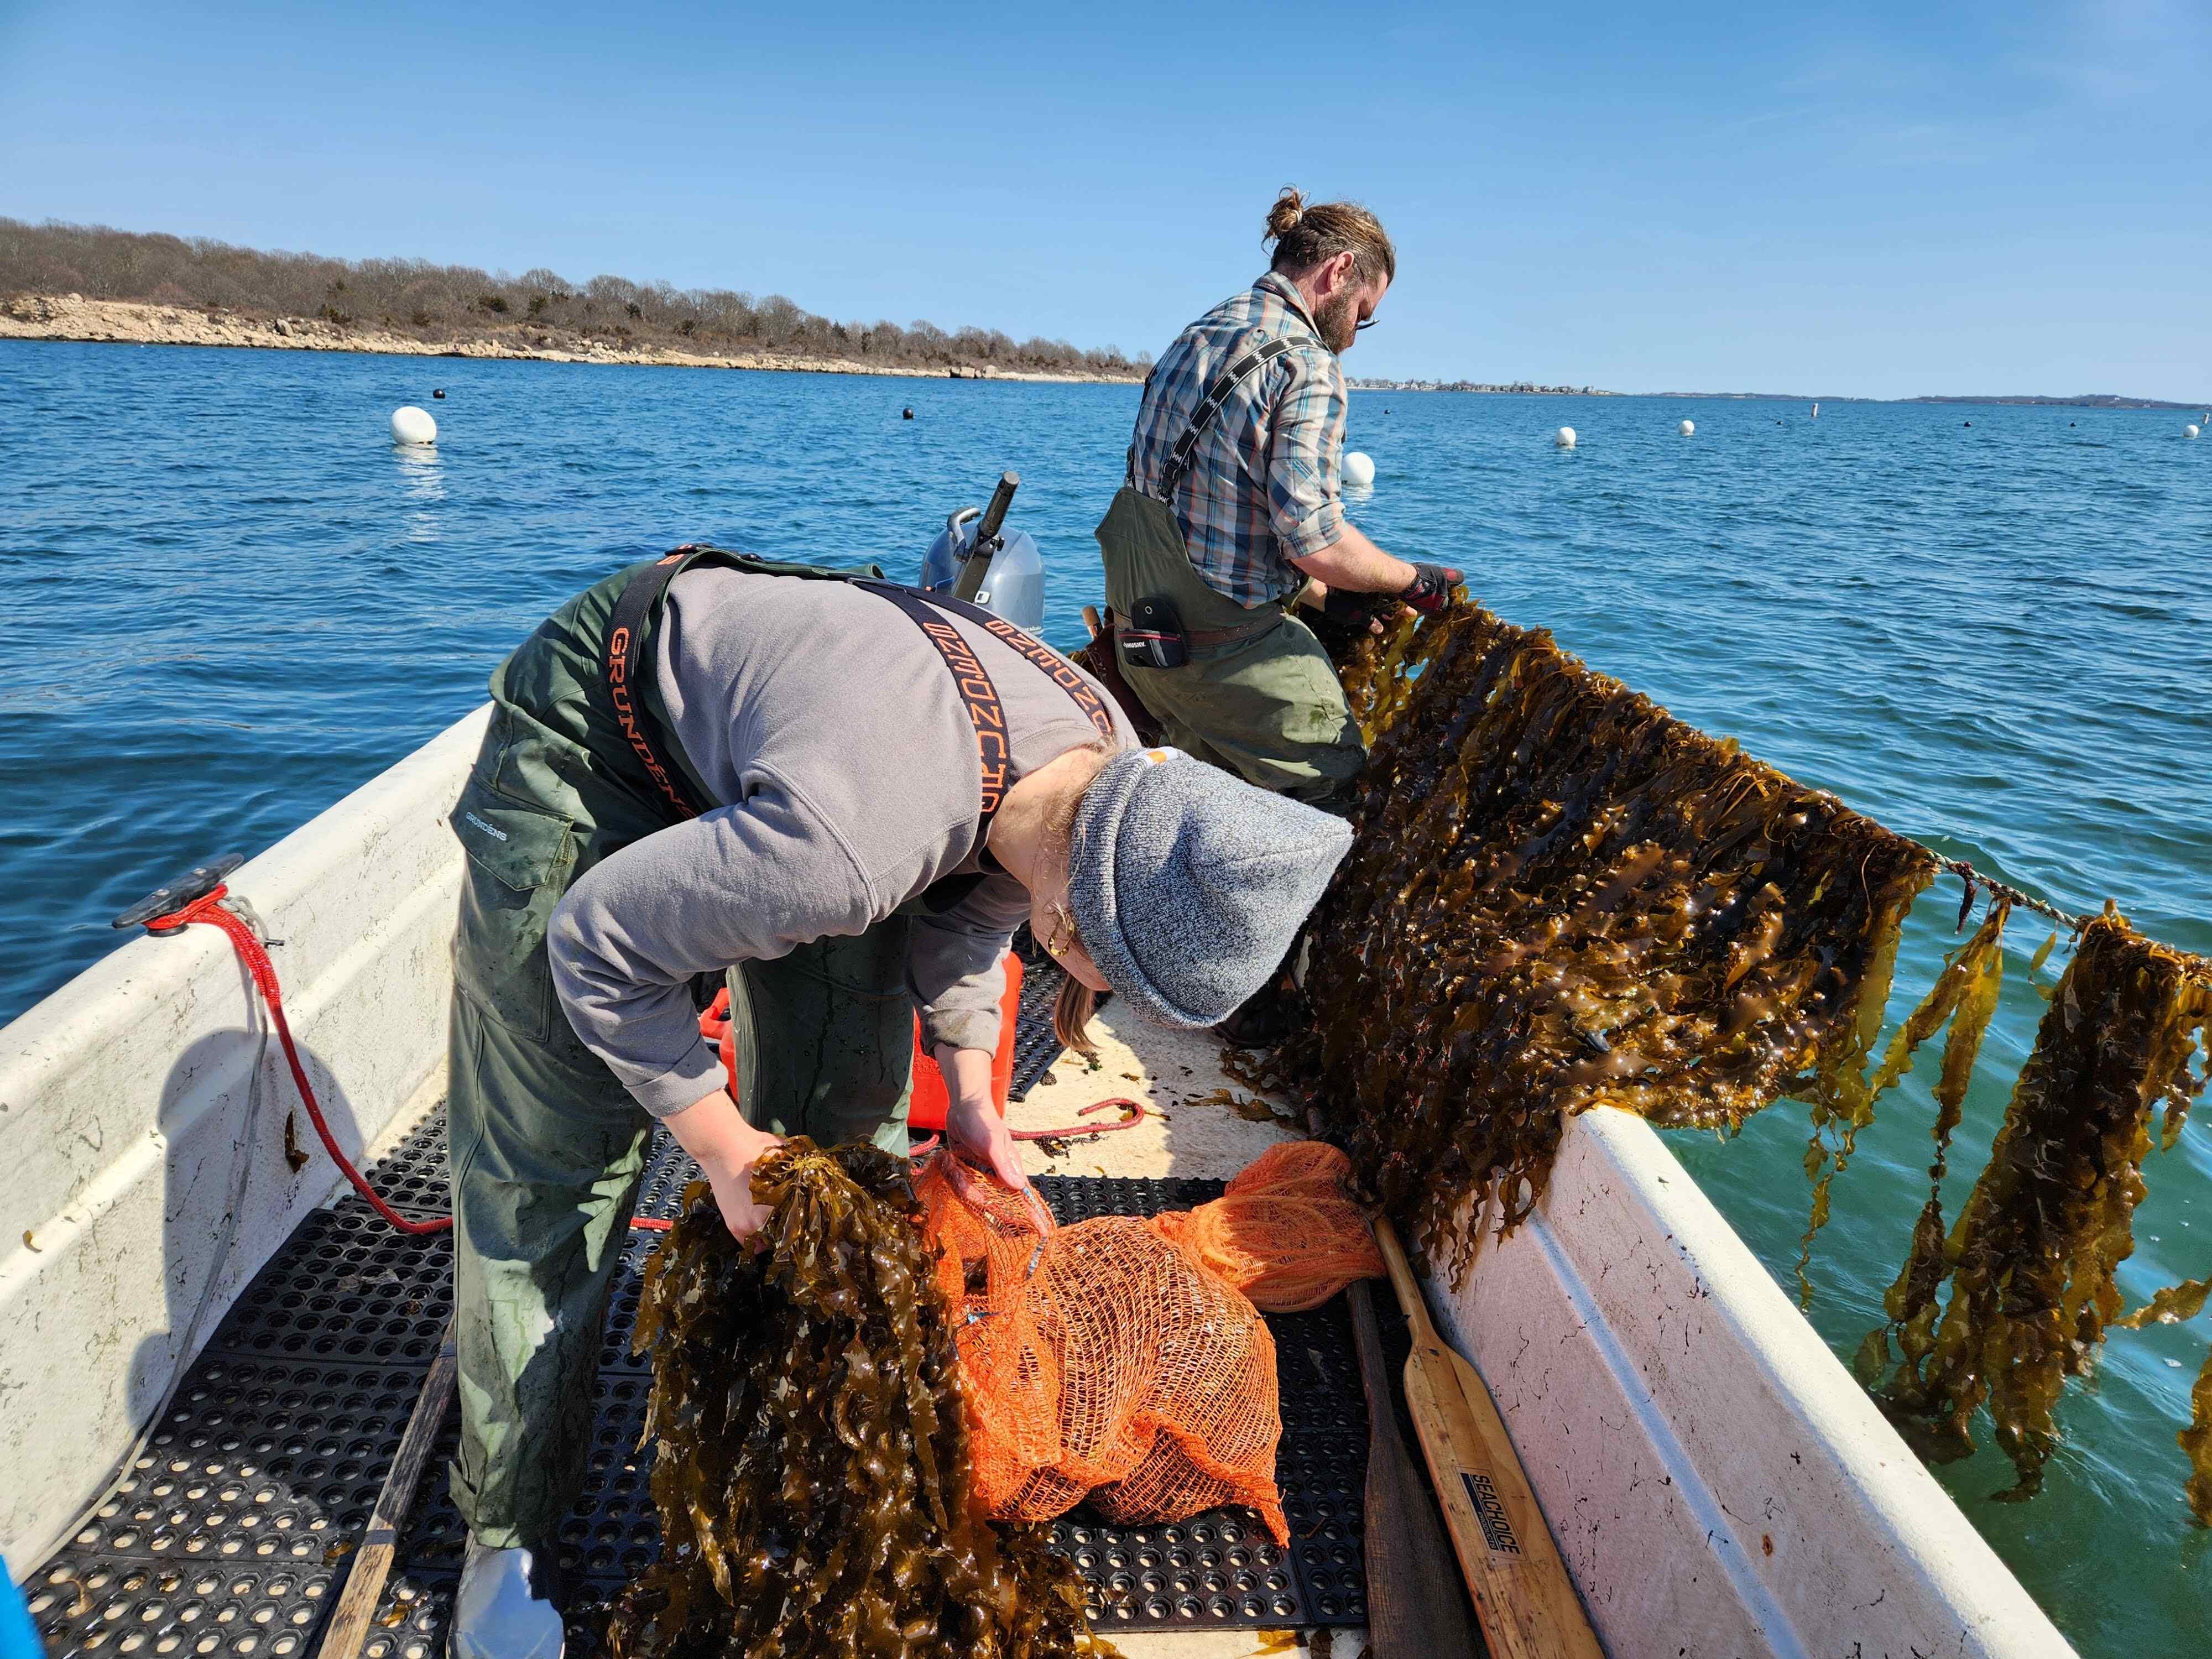 Ocean farmers taking kelp samples to track growth, yield, and quality.